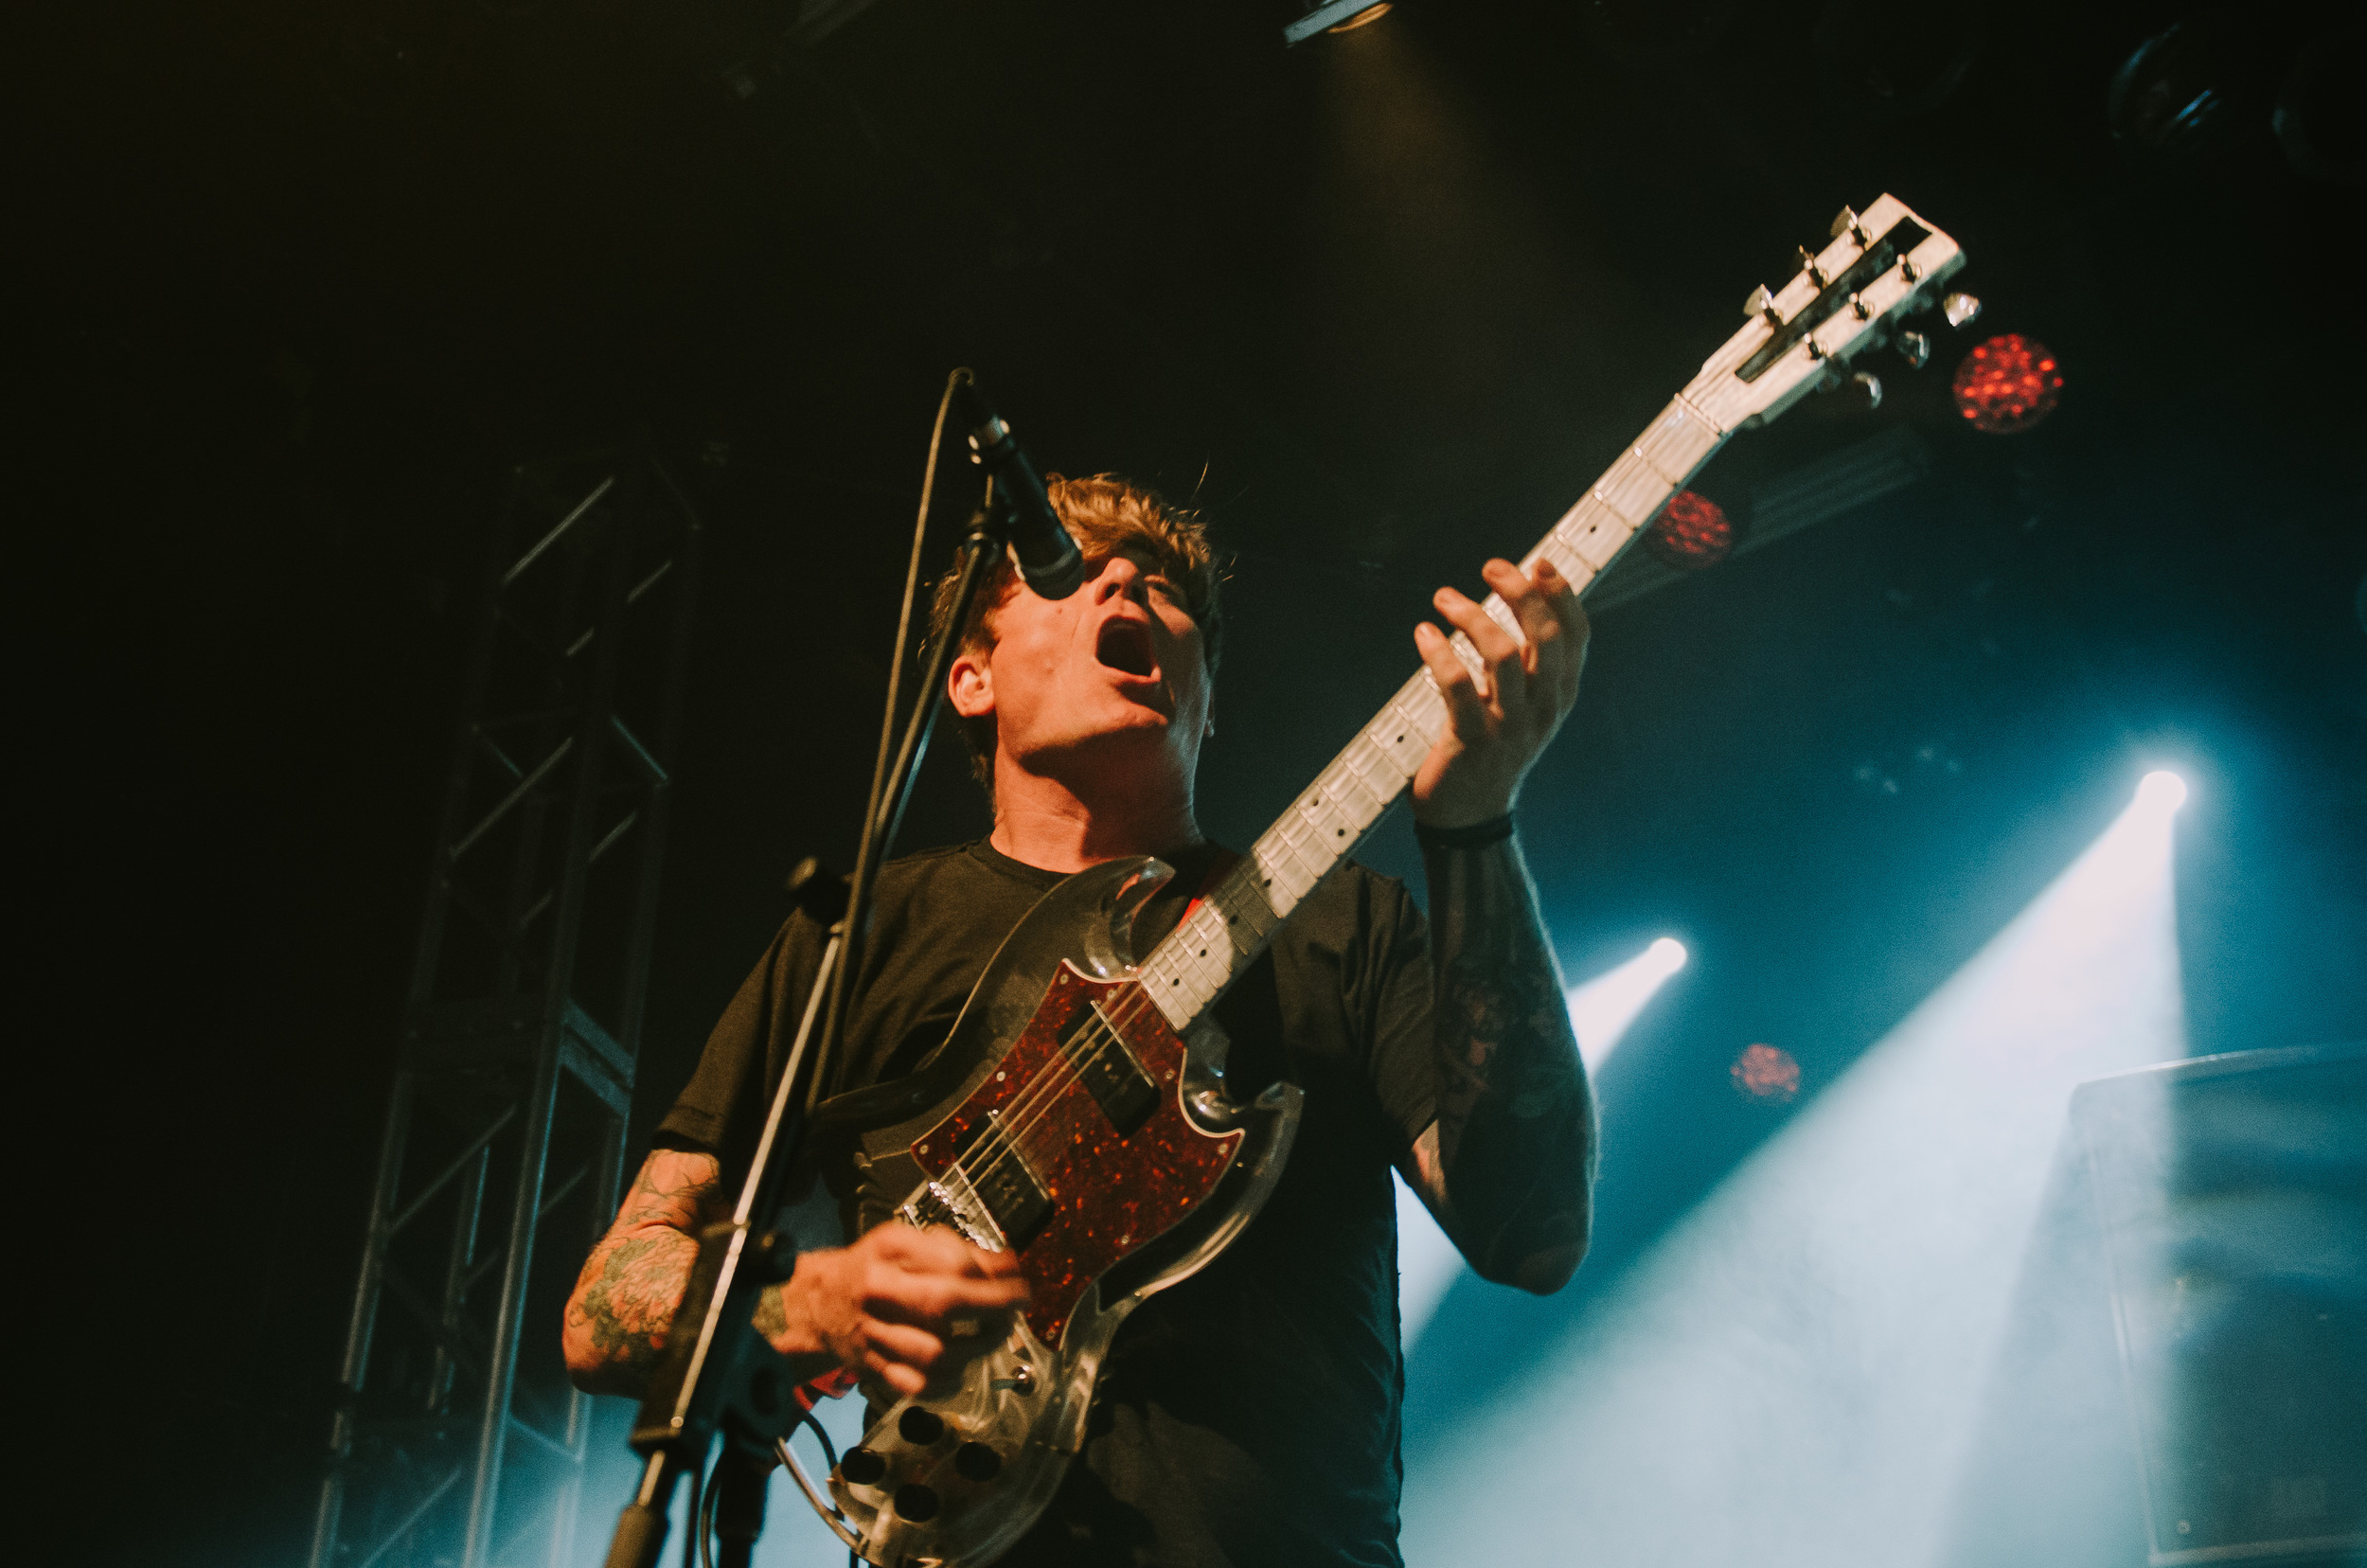 3_Thee_Oh_Sees_Commodore_Ballroom_Timothy_Nguyen_20160618 (8 of 17).jpg